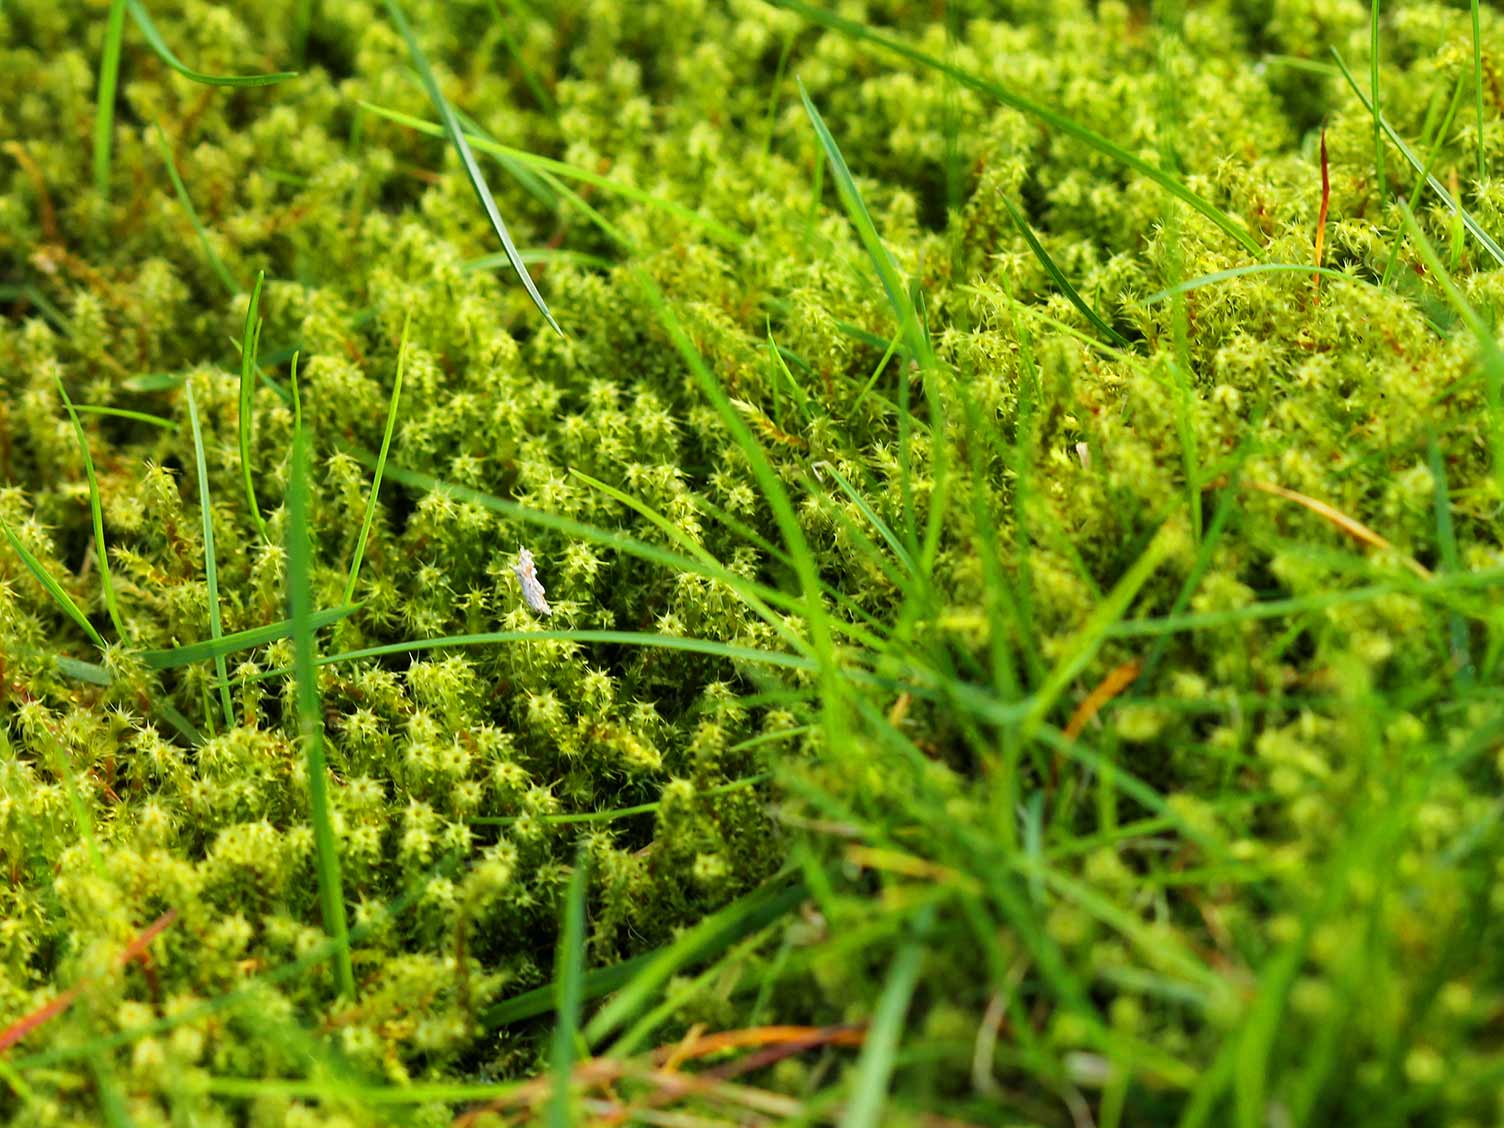 How To Get Rid Of Moss In Your Lawn Naturally